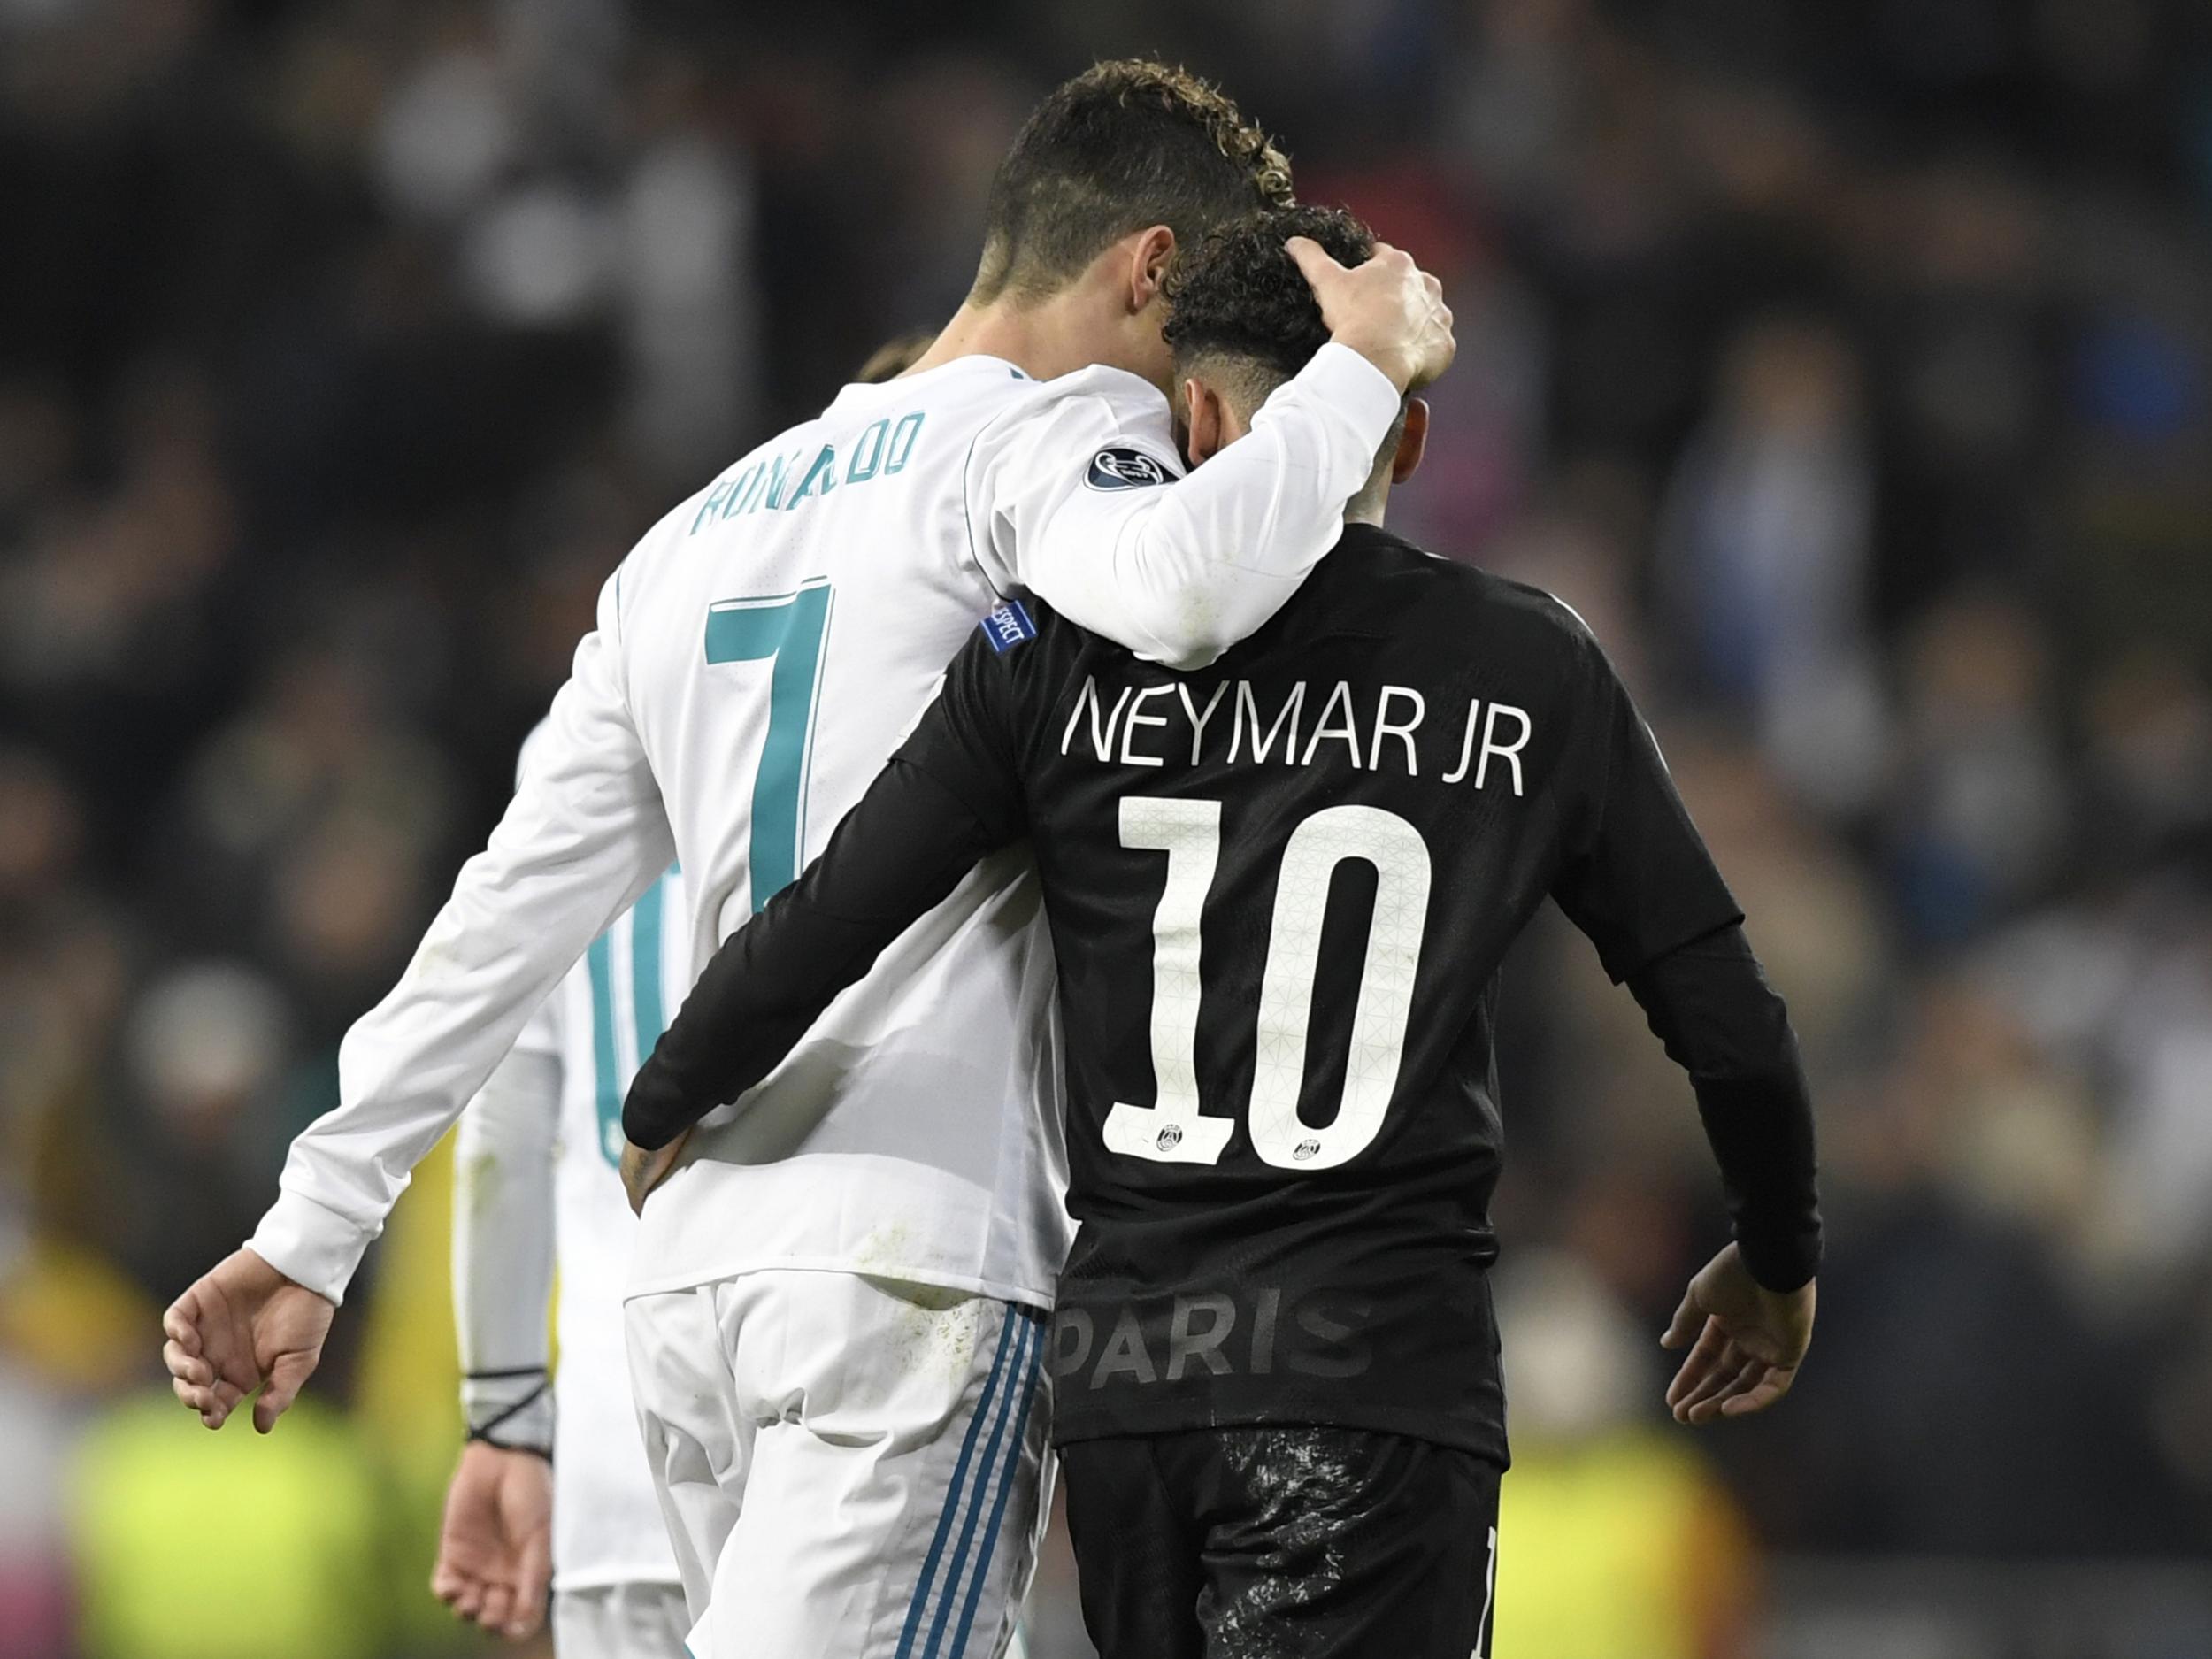 Ronaldo stood taller than Neymar on the night but there is still another leg to go in Paris